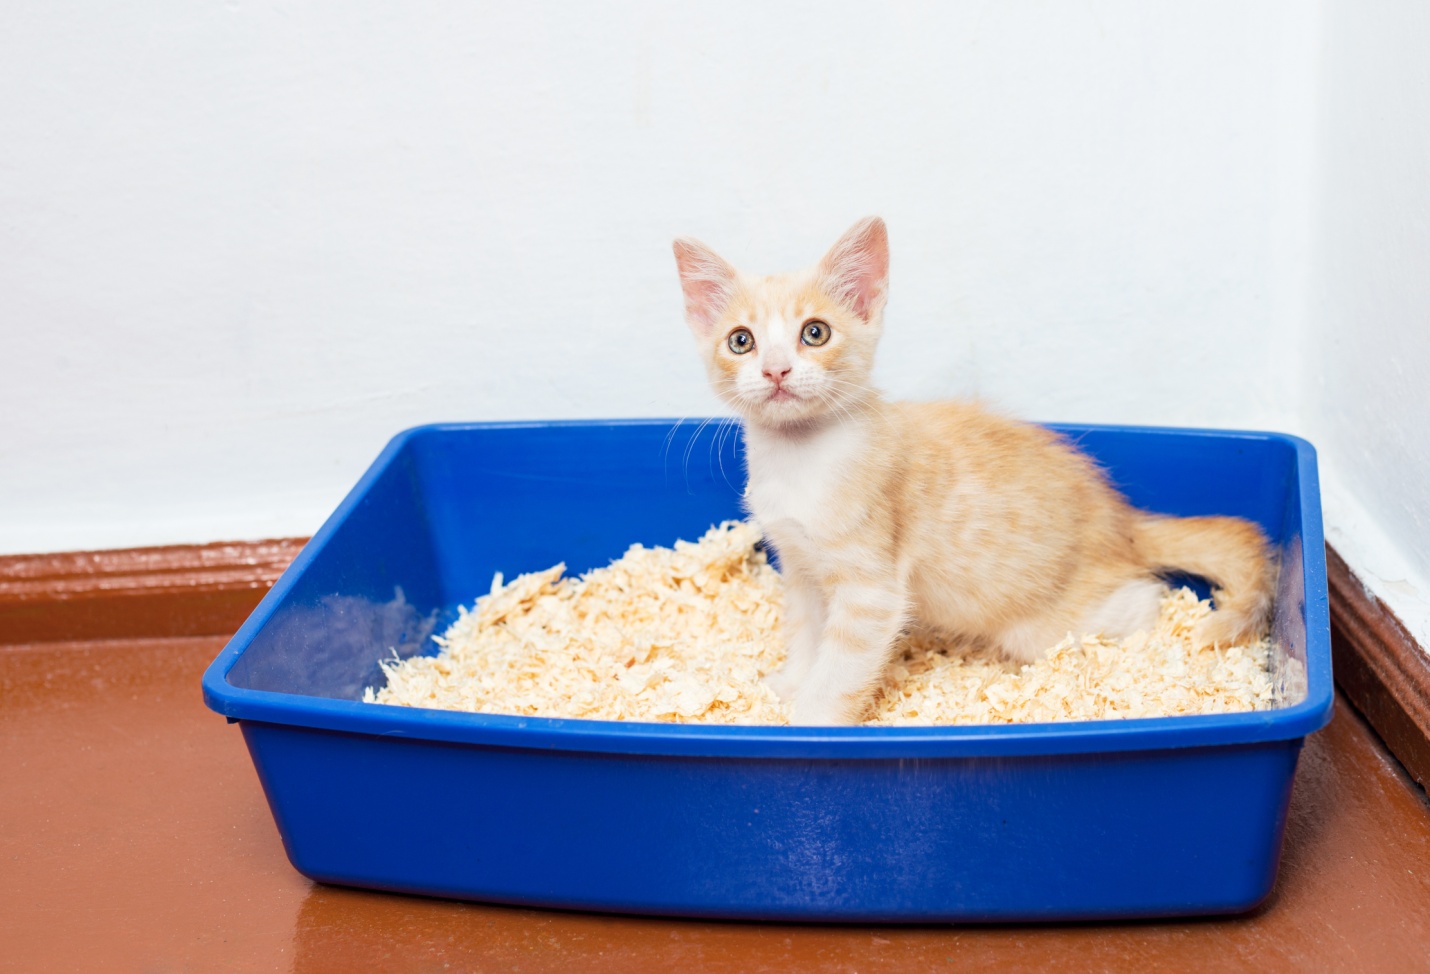 Show your cat the location of the litter box